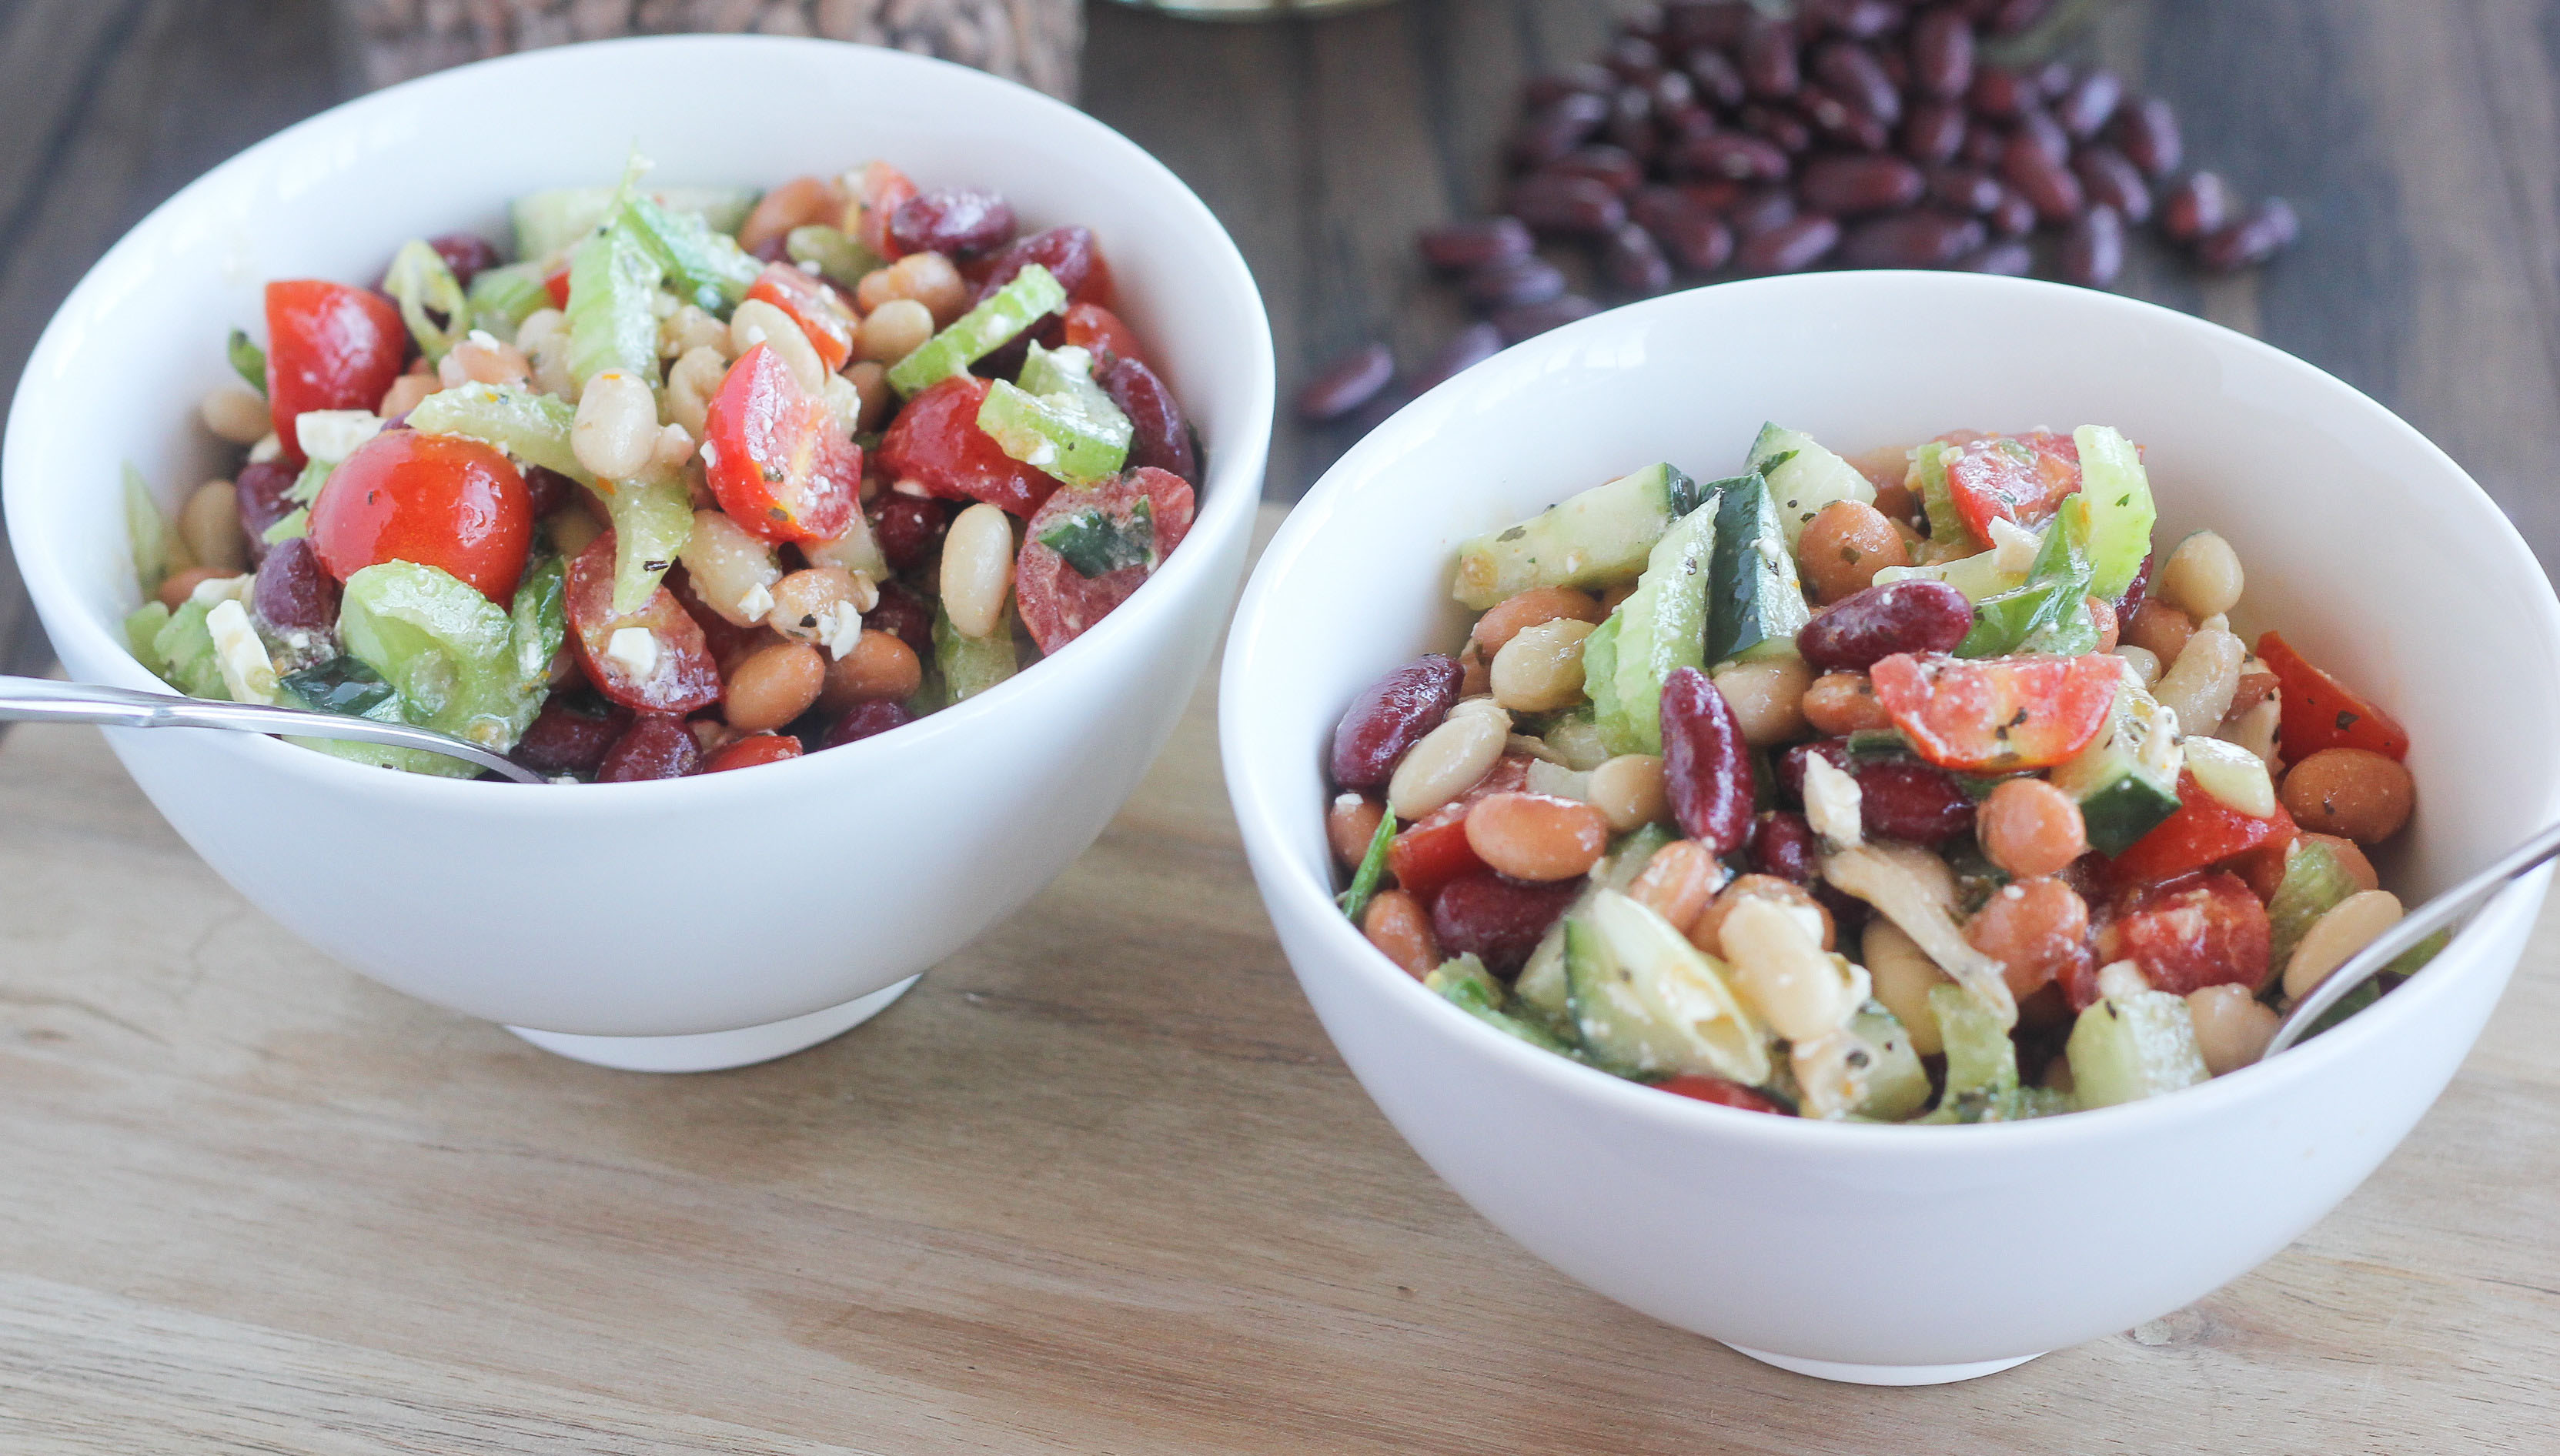 An image depicting the mediterranean bean salad featuring cucumber, tomato, and feta.